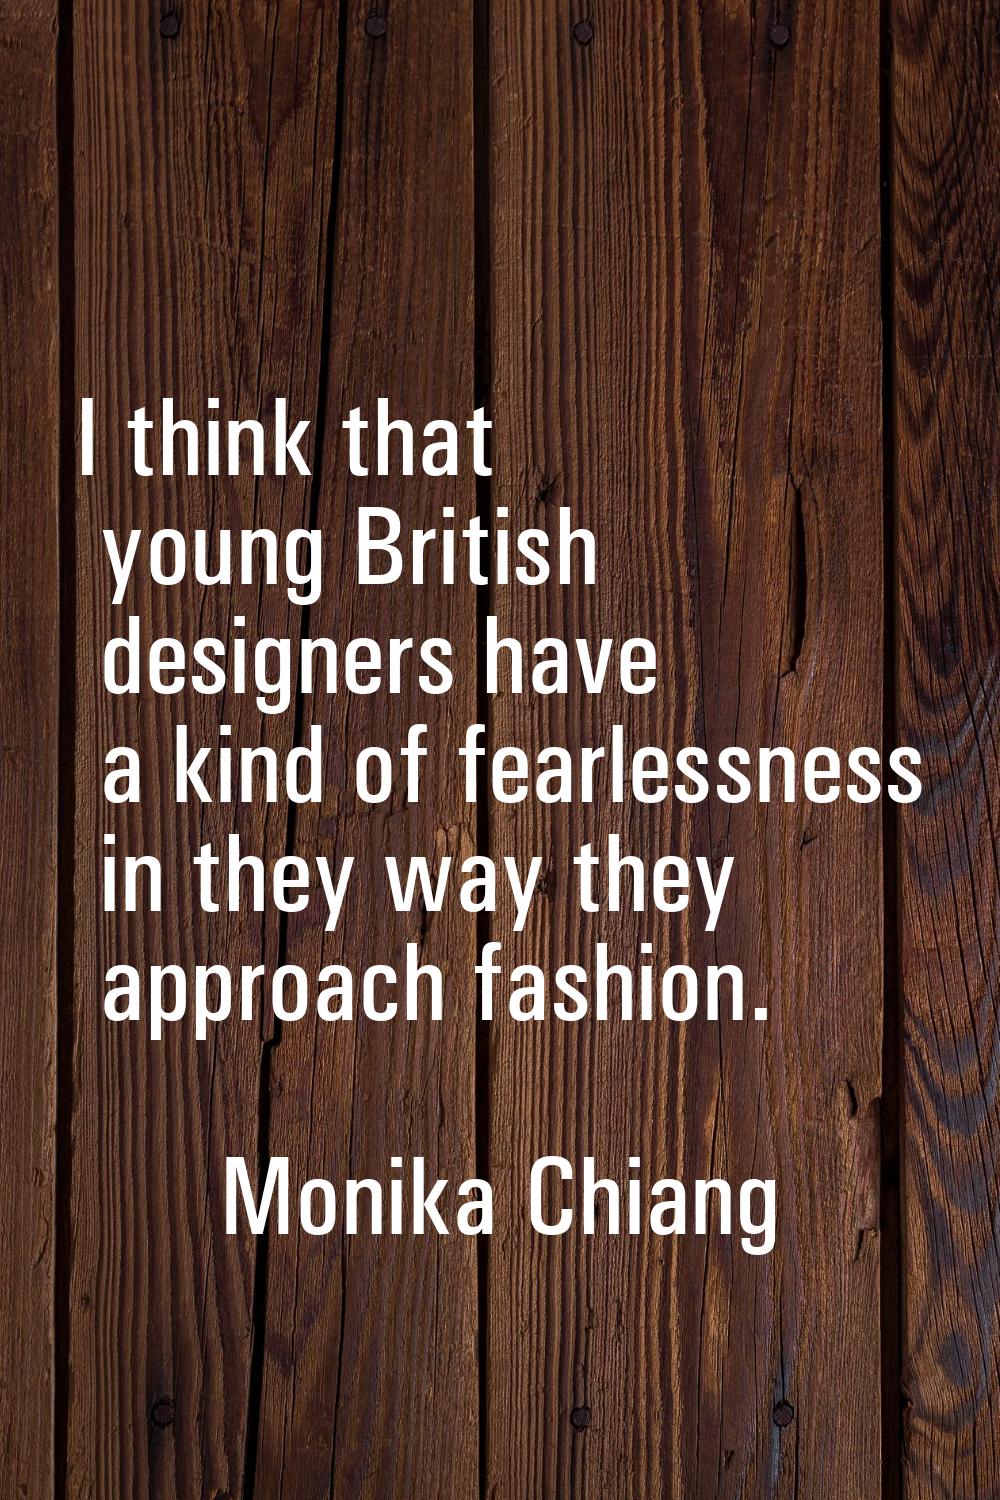 I think that young British designers have a kind of fearlessness in they way they approach fashion.